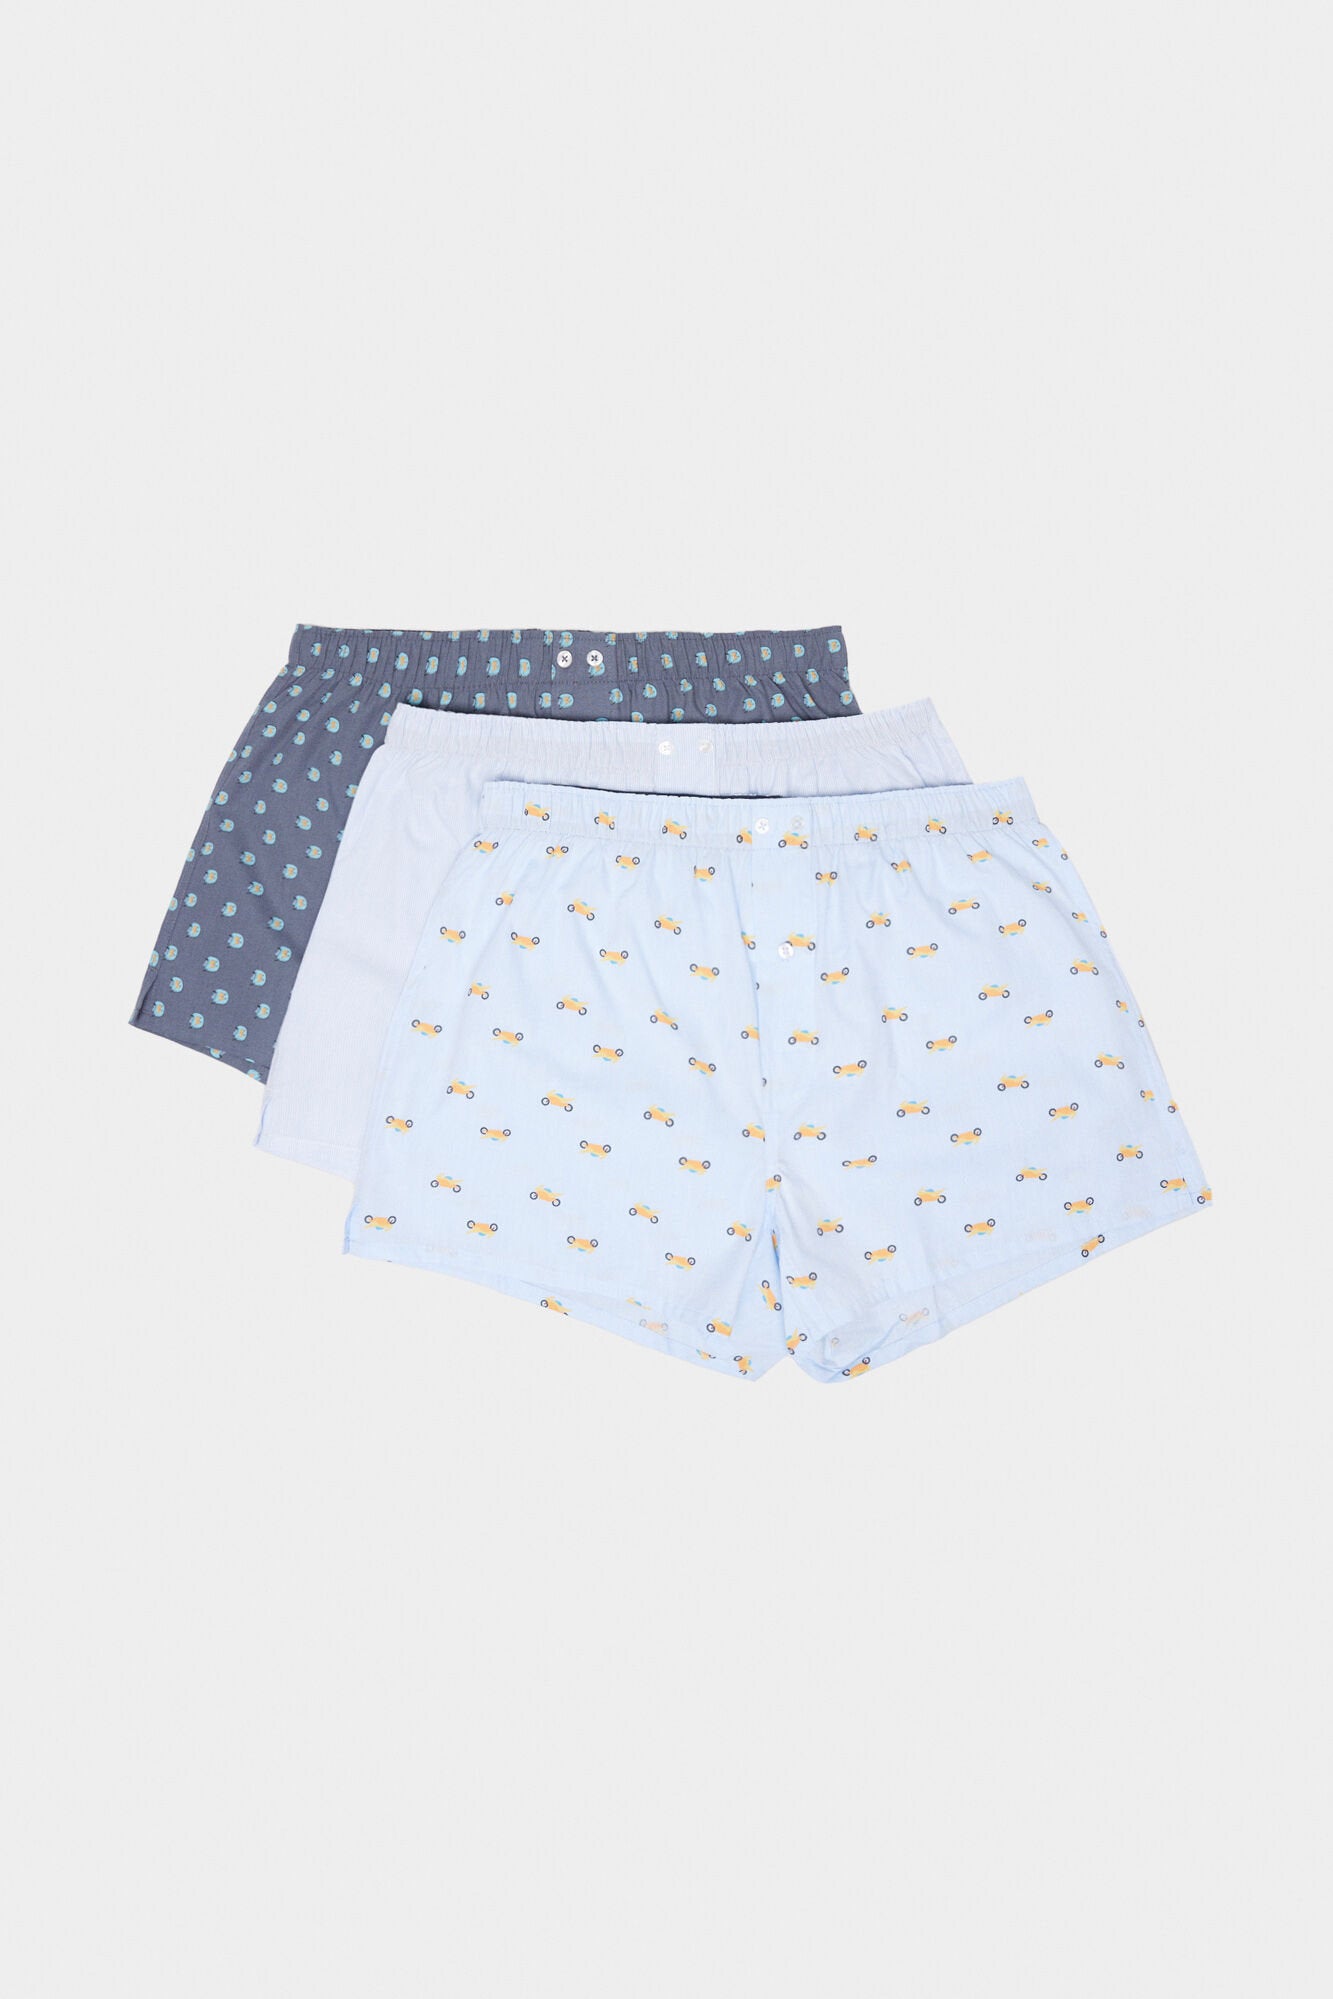 Pack Patterned Boxers_1167484_17_03